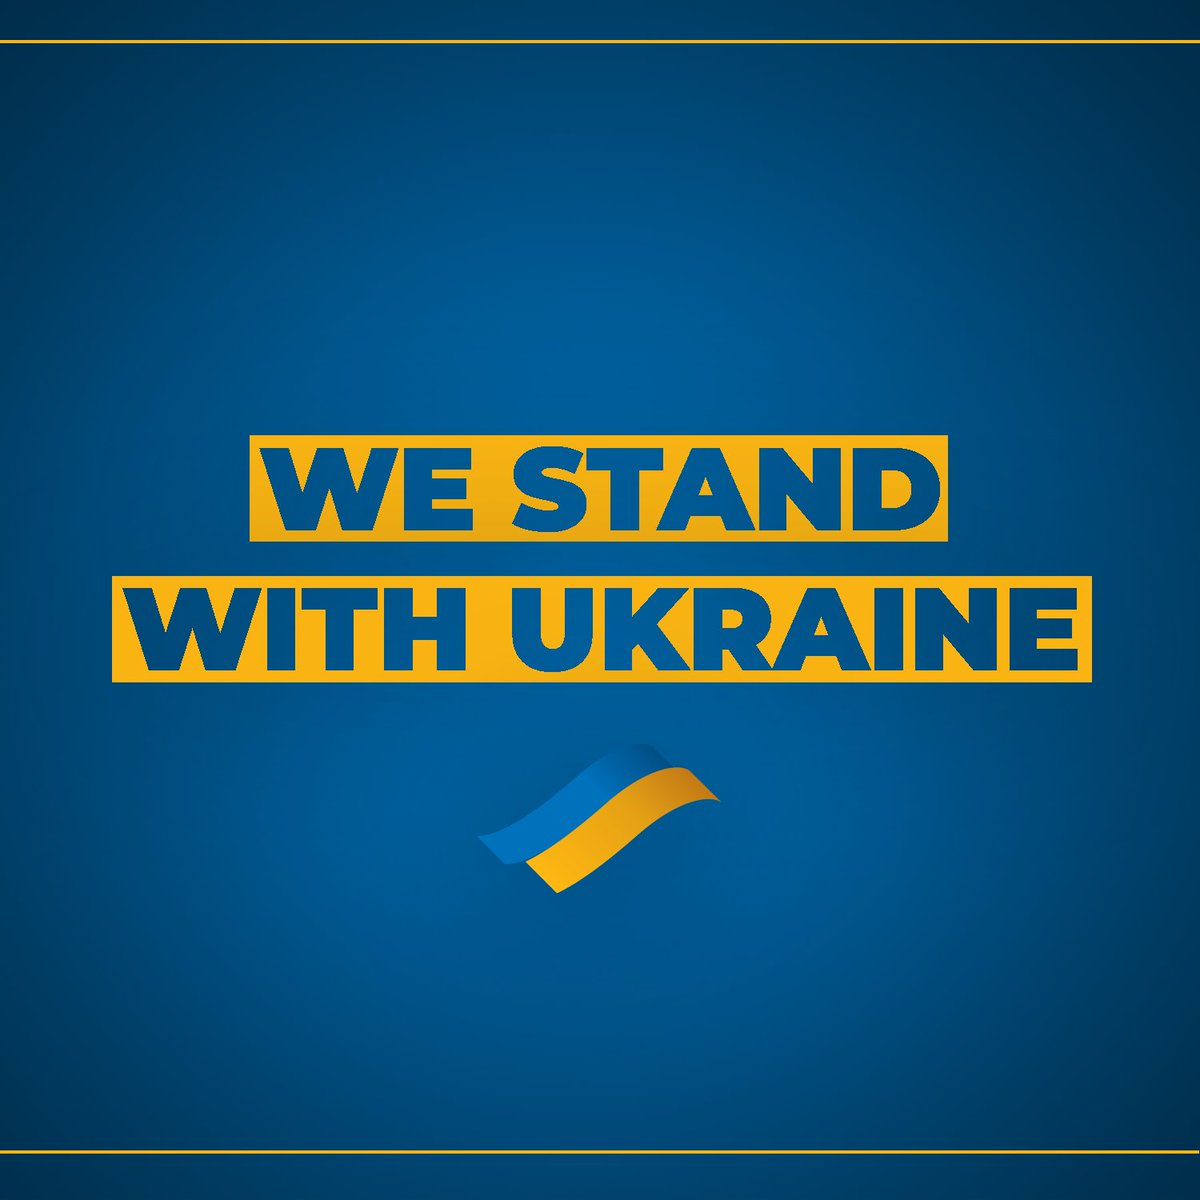 NEWS RELEASE: MLA and chair for the Advisory Council on Alberta-Ukraine Relations @HomeniukJ sent a letter to the federal government, affirming Alberta's strong support for Ukraine amid rising Russian aggression. More here: unitedconservativecaucus.ca/news-release-u… #AbLeg #StandWithUkraine